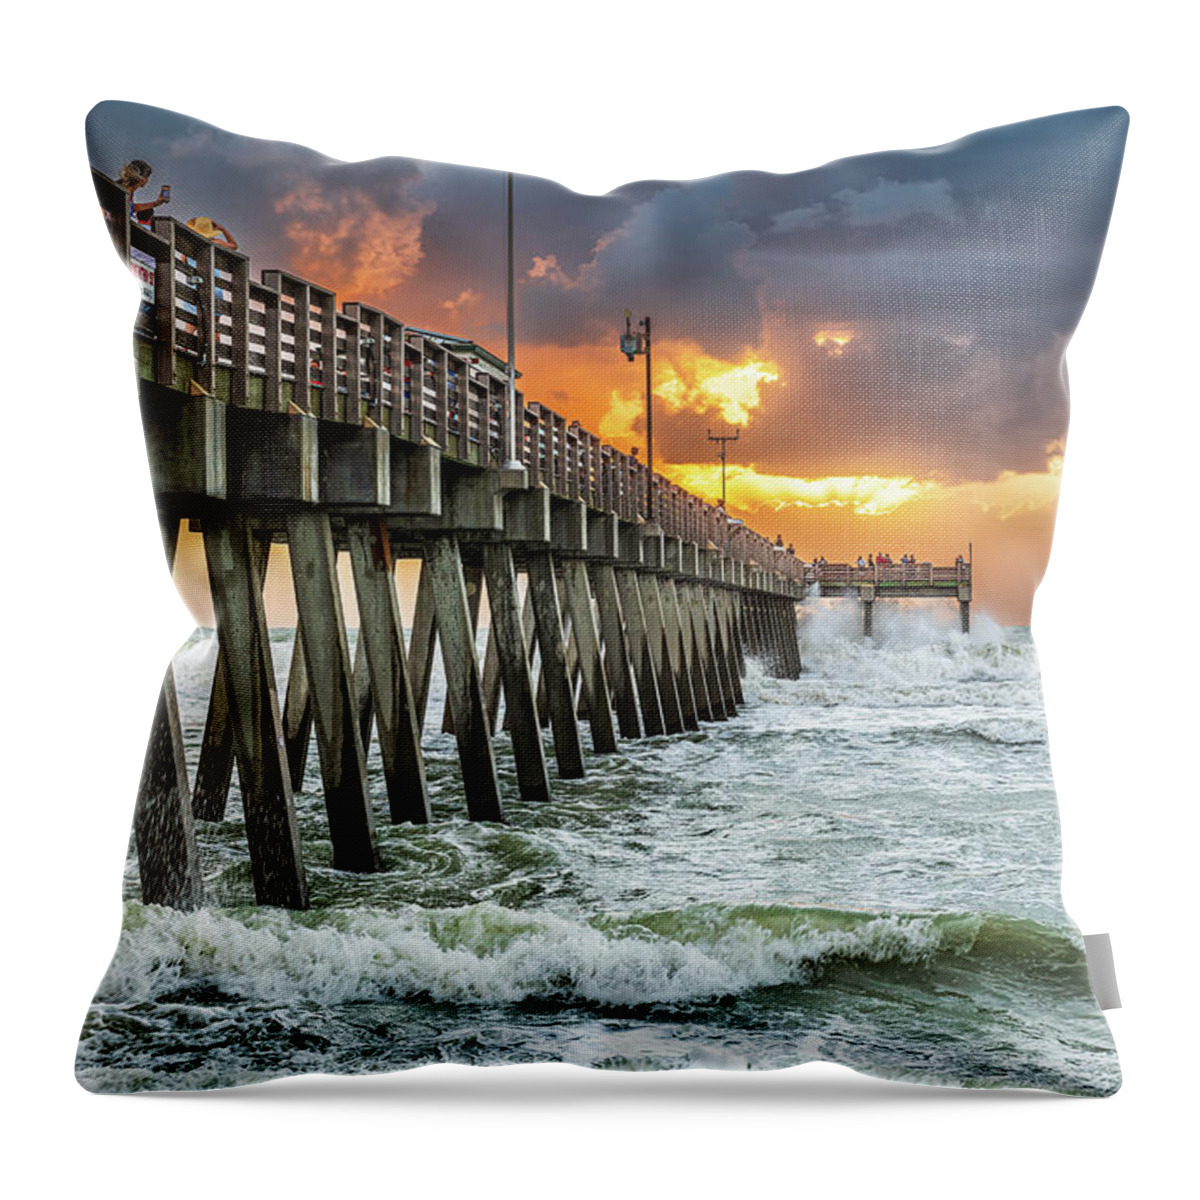 Venice Fishing Pier Throw Pillow featuring the photograph High Surf at Venice Fishing Pier by Rudy Wilms